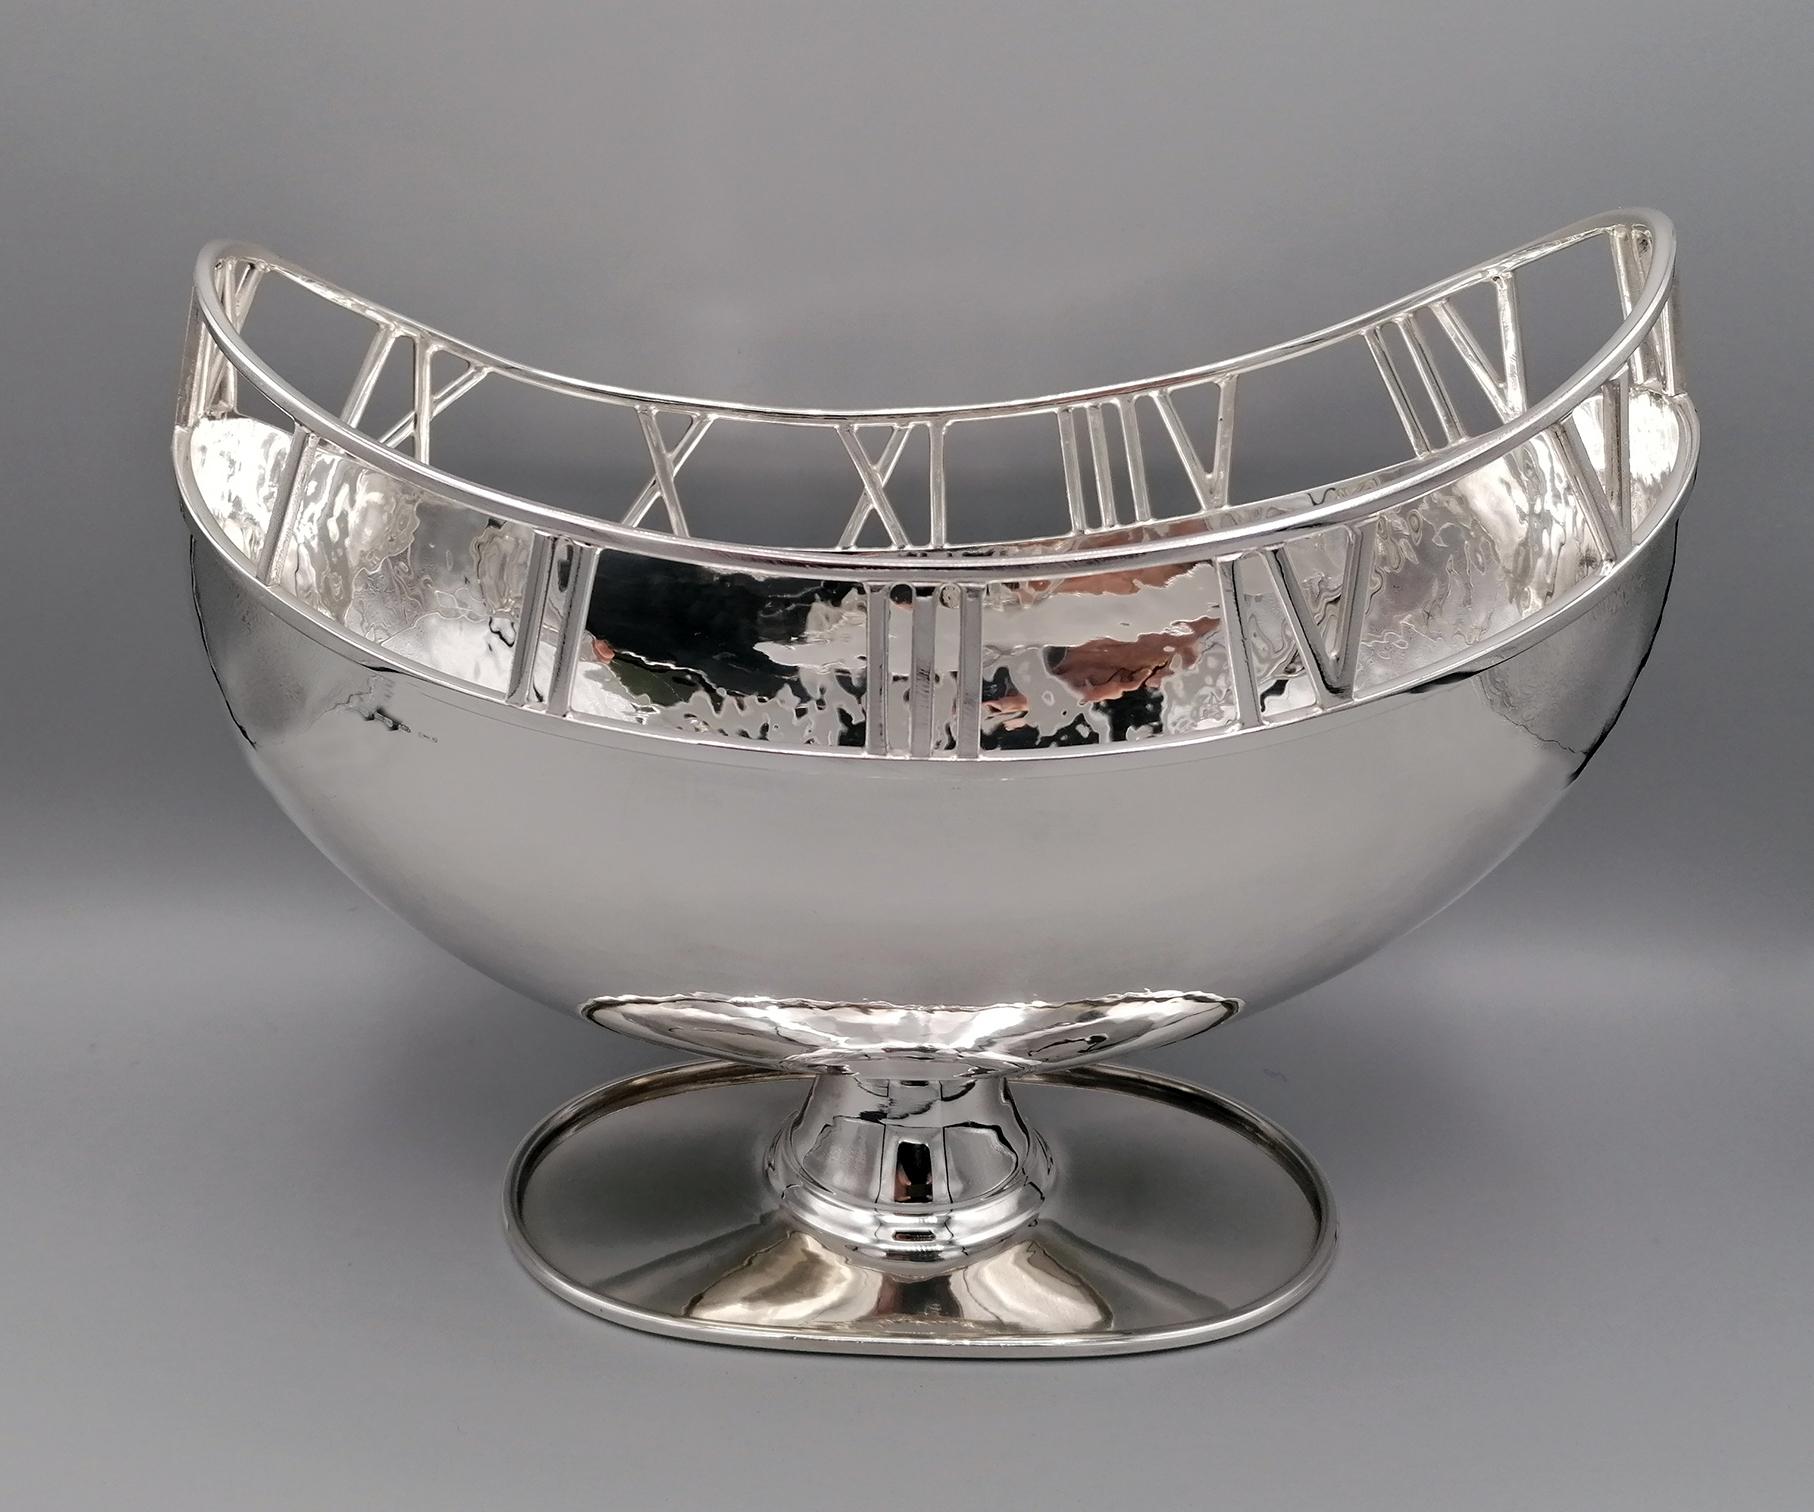 800 silver oval centerpiece with base. The body was made by hammering the silver sheet by hand and then welded on a foot which is also oval and with a raised edge. 
In the upper edge, Roman numerals have been cutout of silver and then welded with